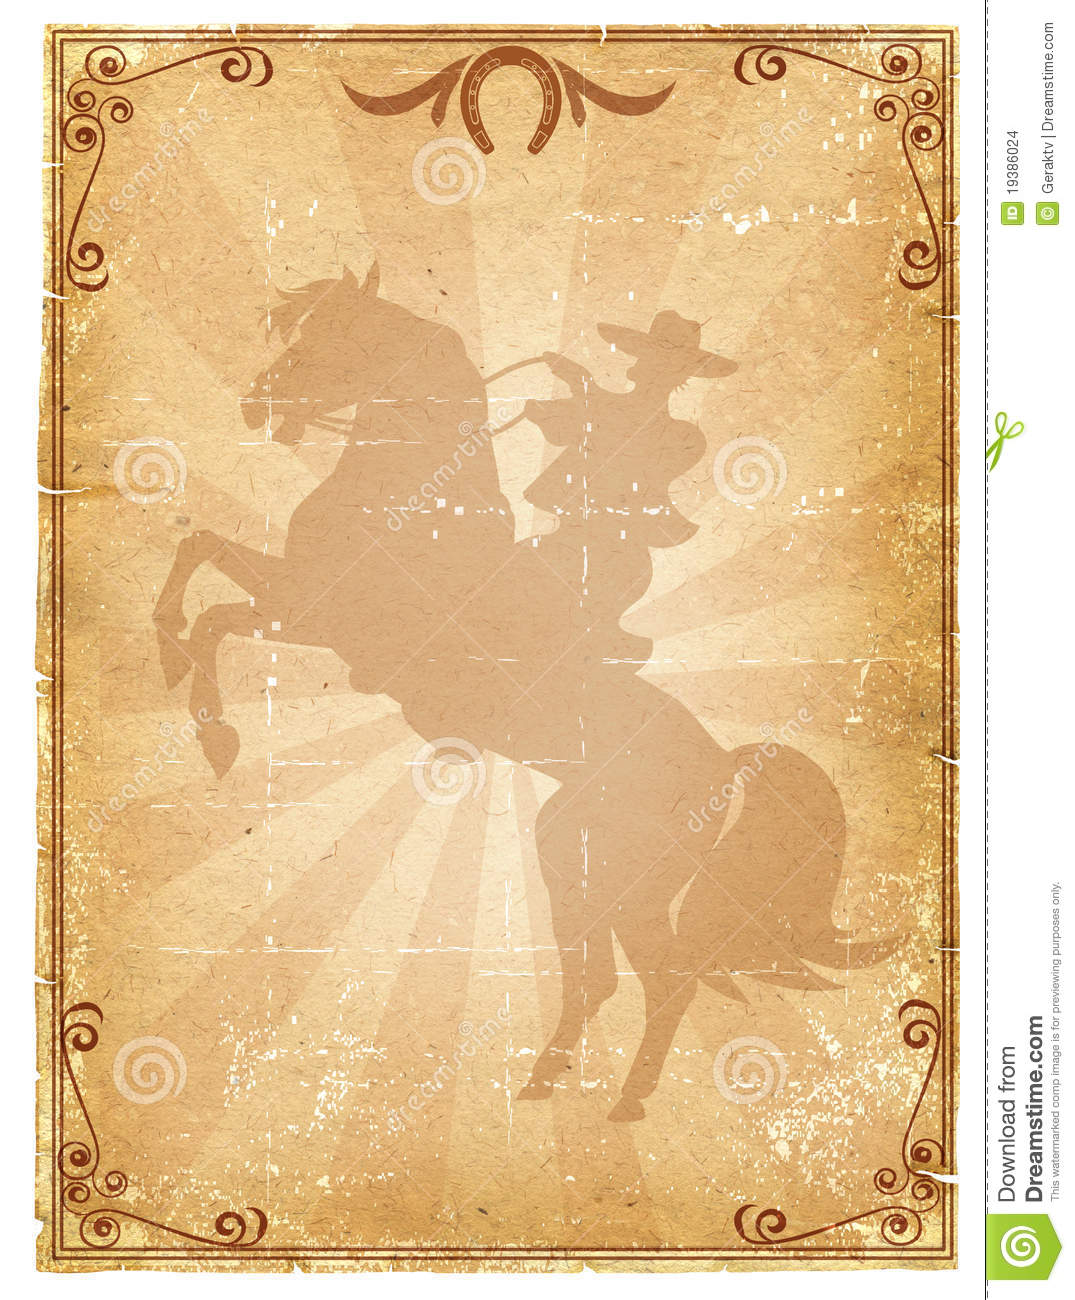 Western Leather Backgrounds Cowboy old paper background